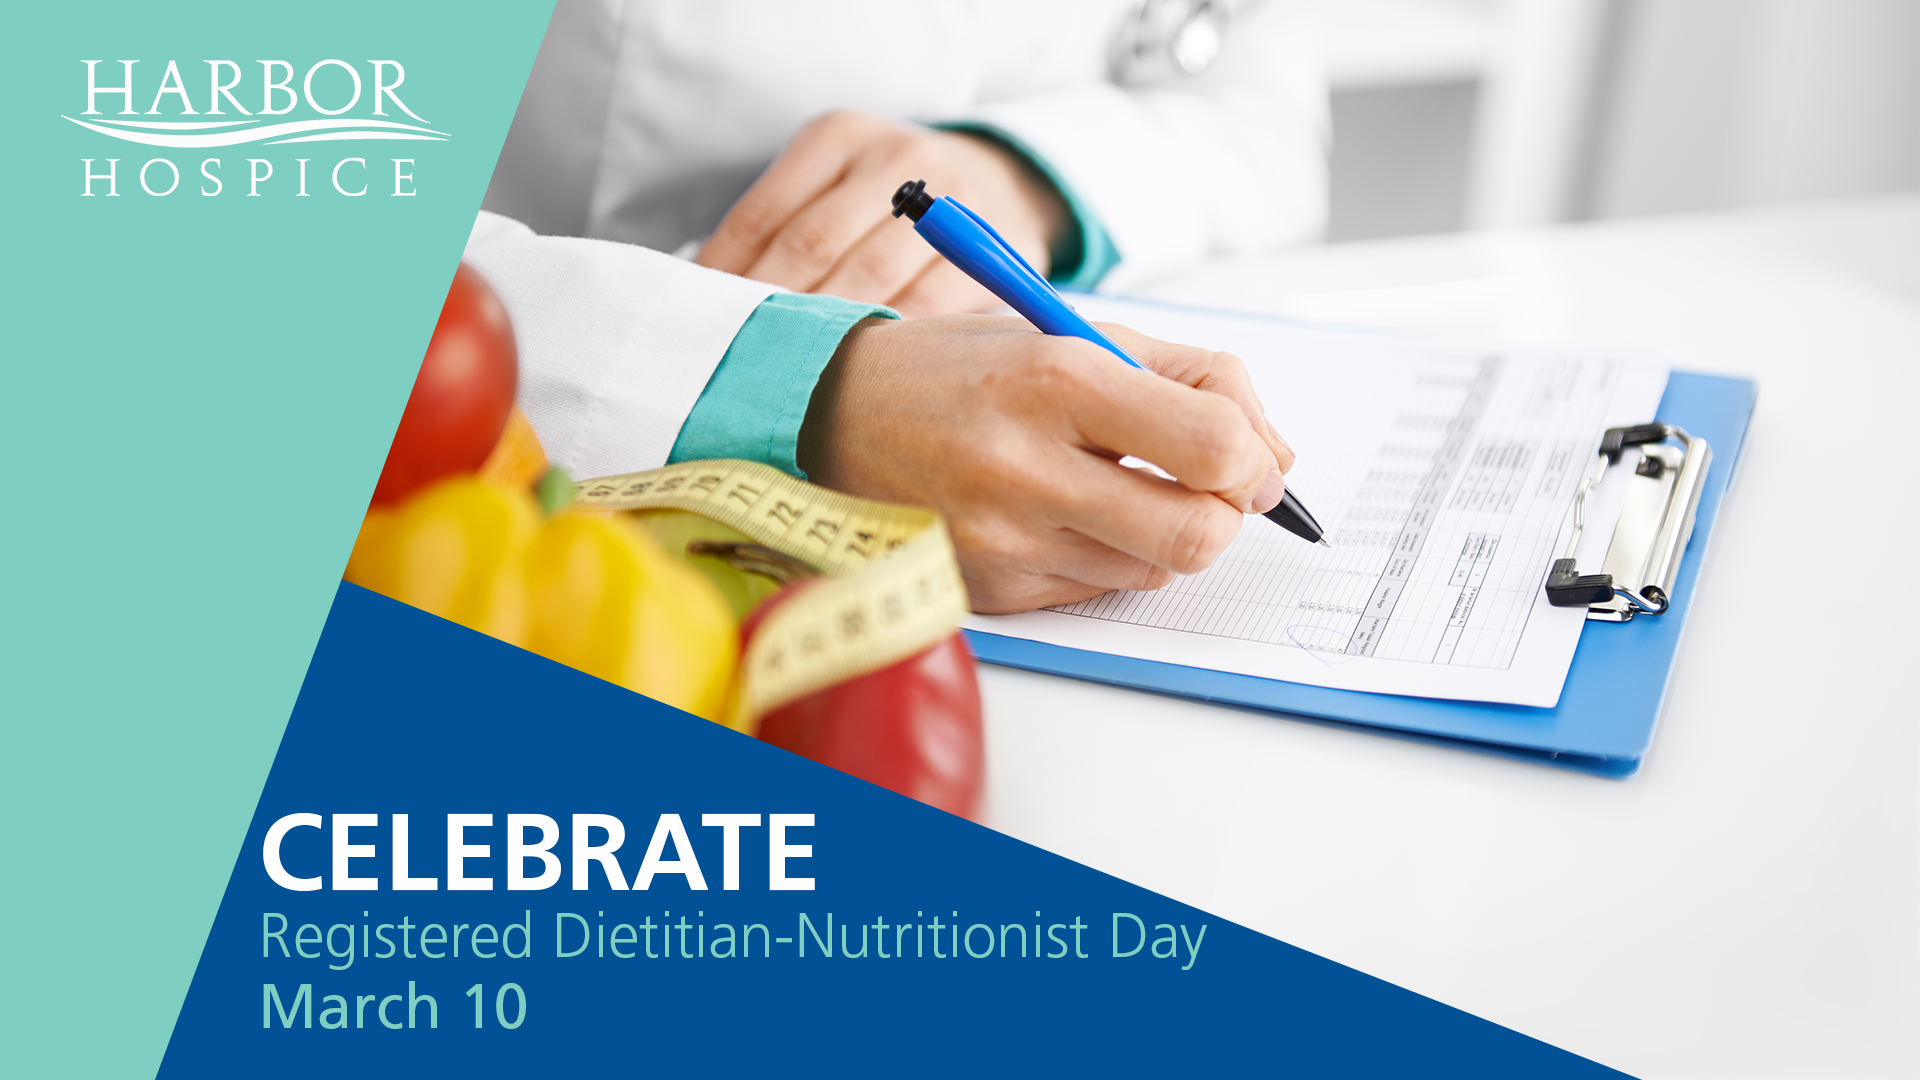 Announcement National Week Month dietitian - March 9 is National Registered Dietitian Nutritionist Day!